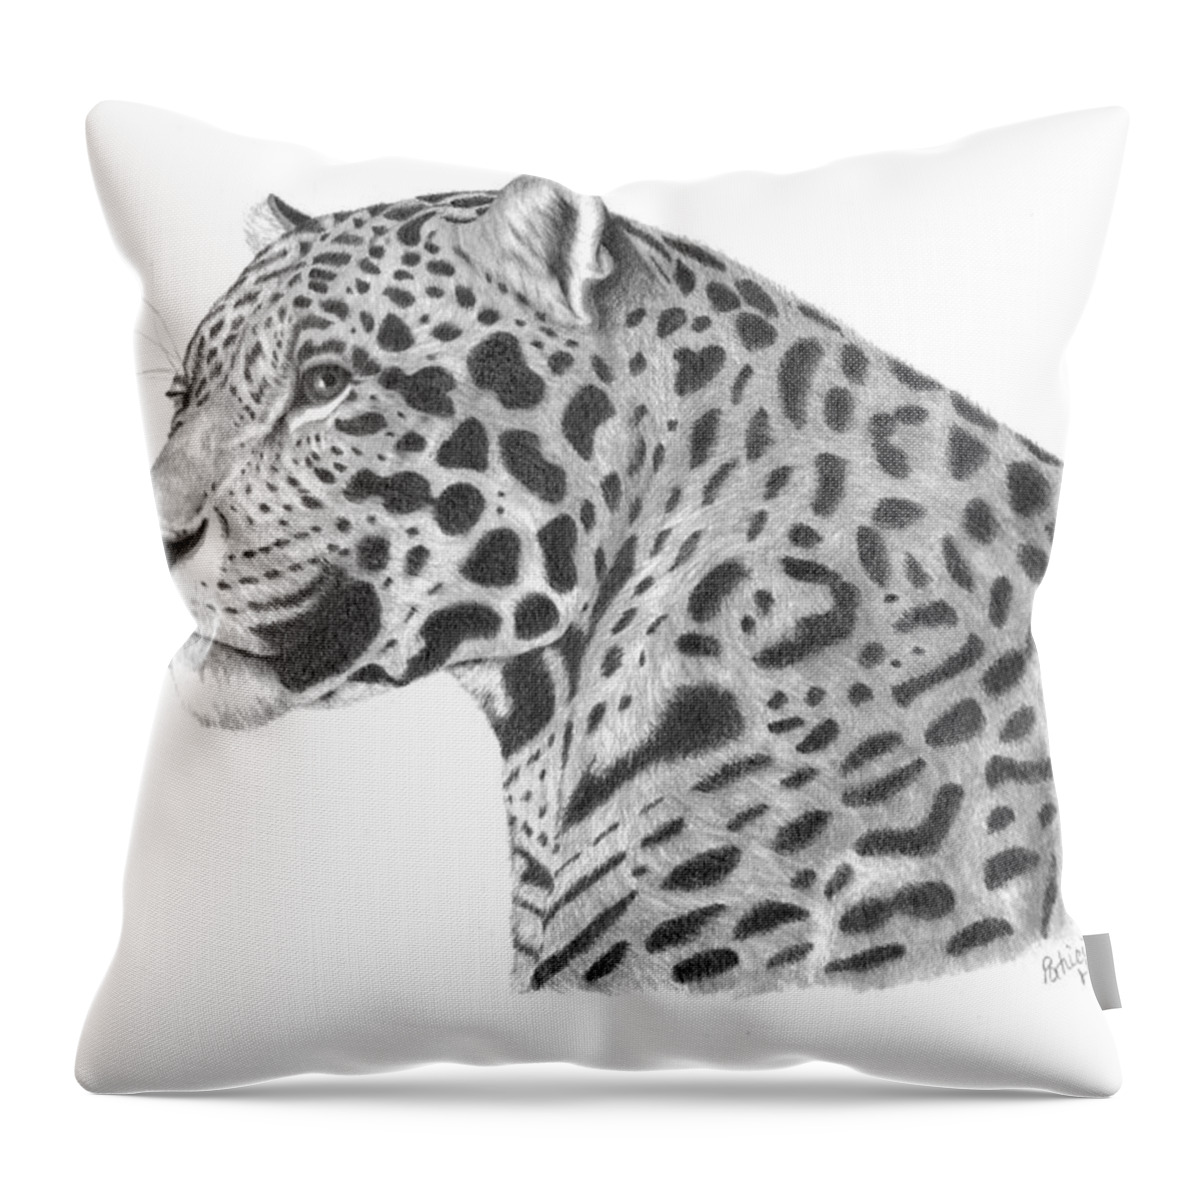 Leopard Throw Pillow featuring the drawing A Leopard's Watchful Eye by Patricia Hiltz